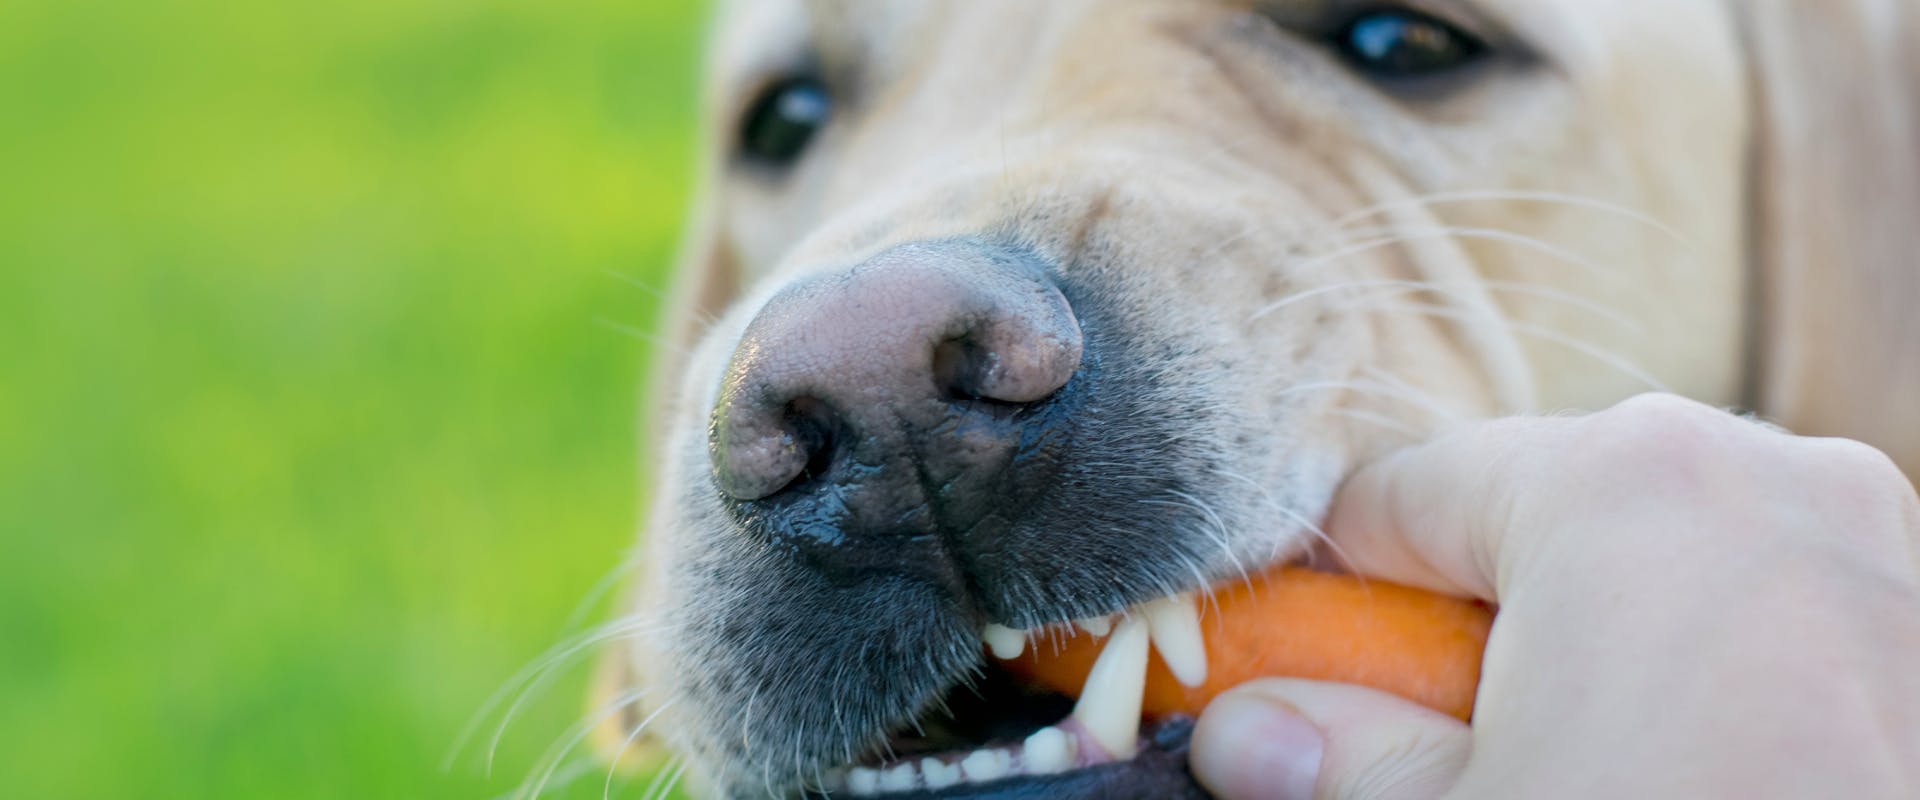 a close up of a labrador biting down on a carrot held by a human hand